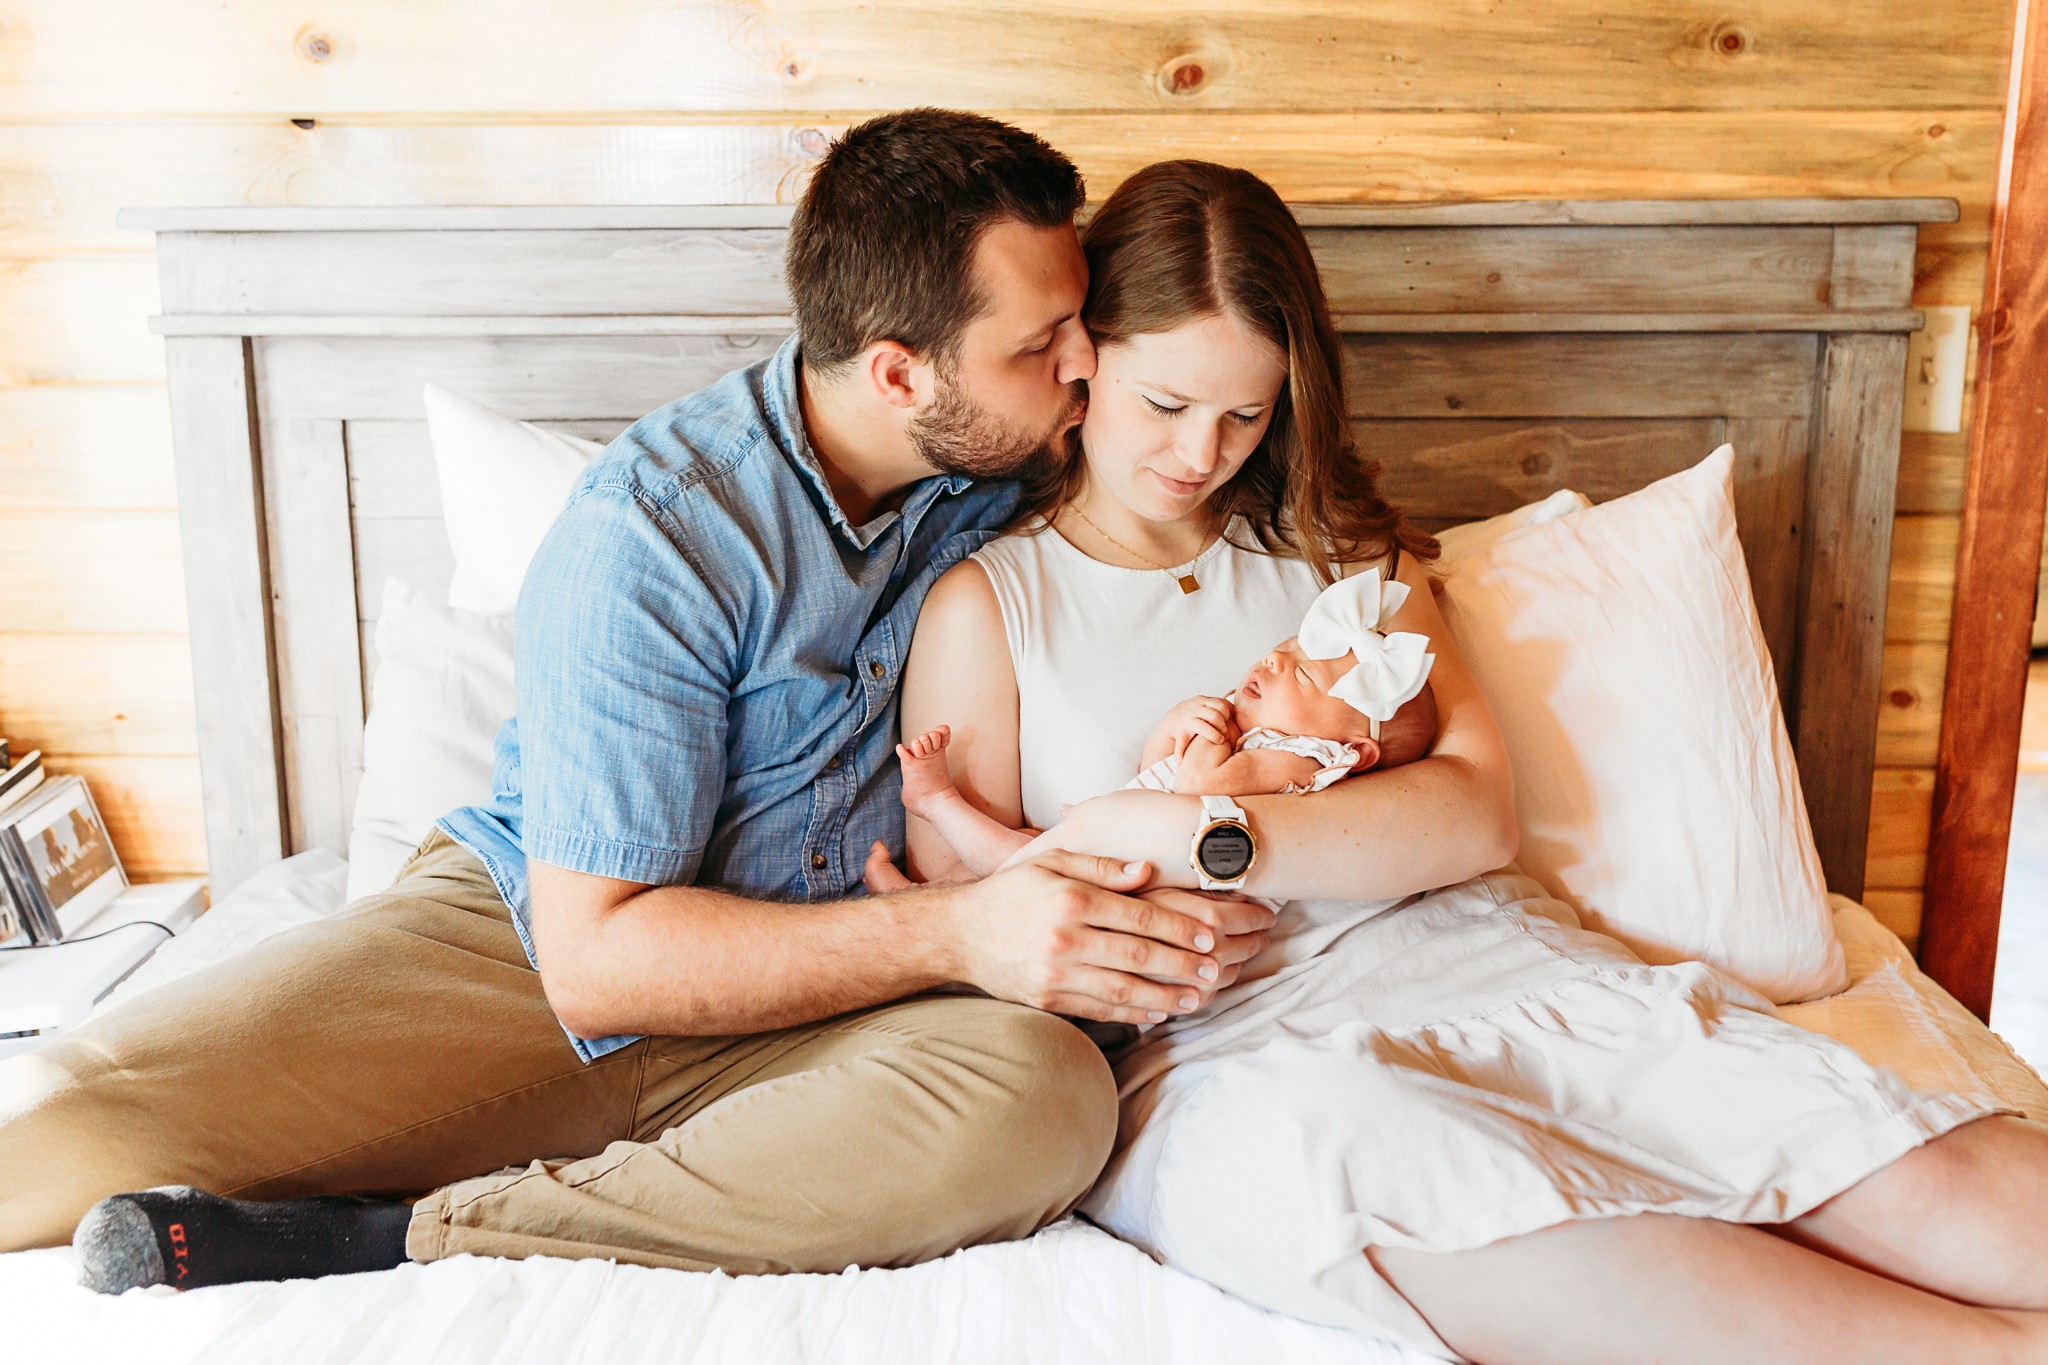 Mom and Dad sit on bed with newborn during OKC newborn photoshoot.